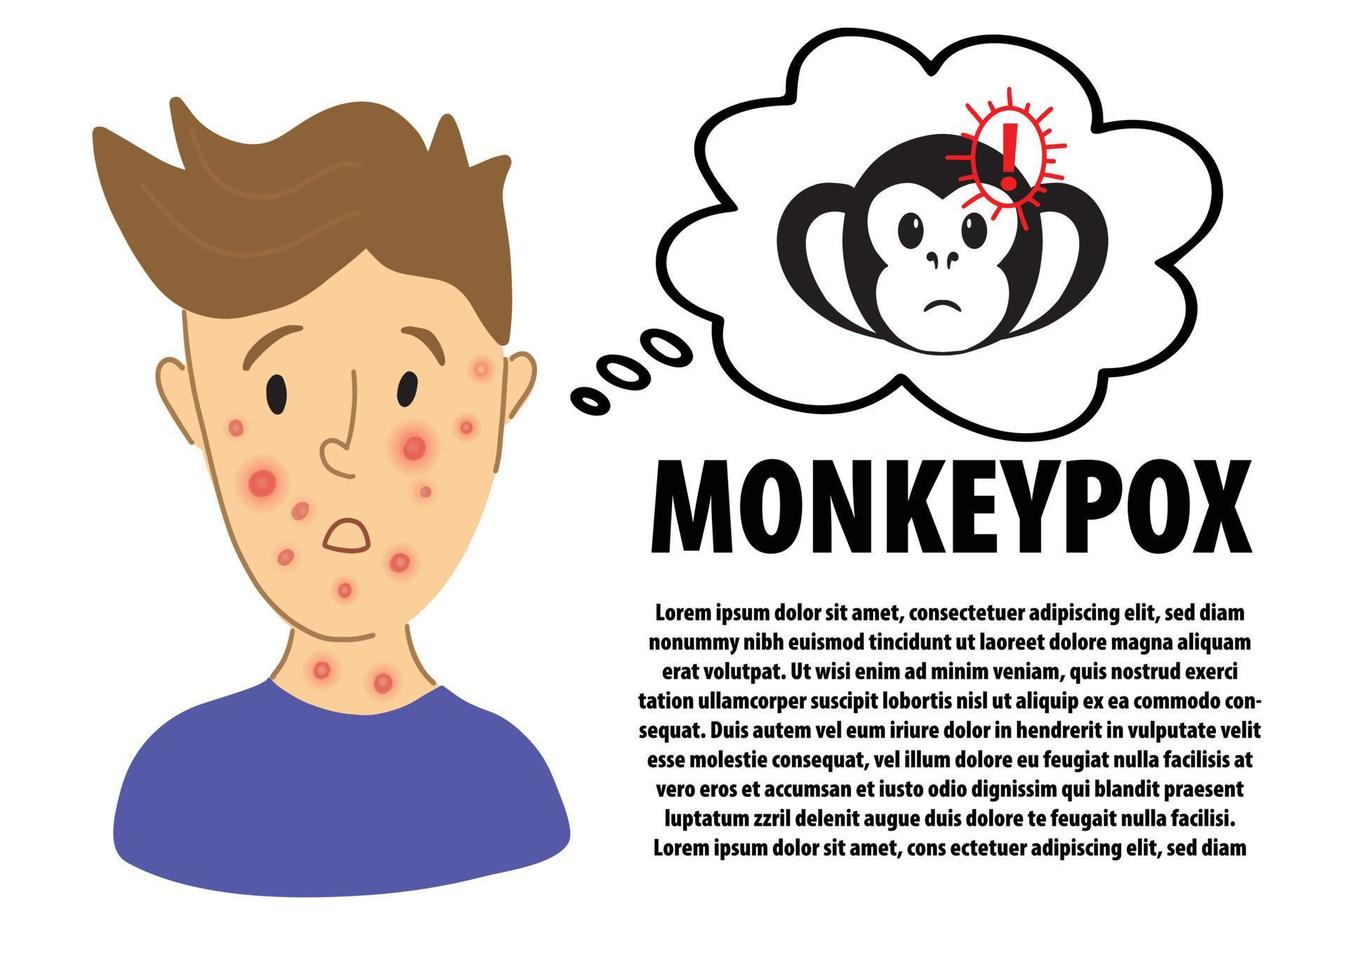 Monkeypox inphographic banner design. Male suffering from new virus Monkeypox. Monkeypox virus alert danger icon sign. flat character portrait with ed rash on face - symptoms of smallpox. vector